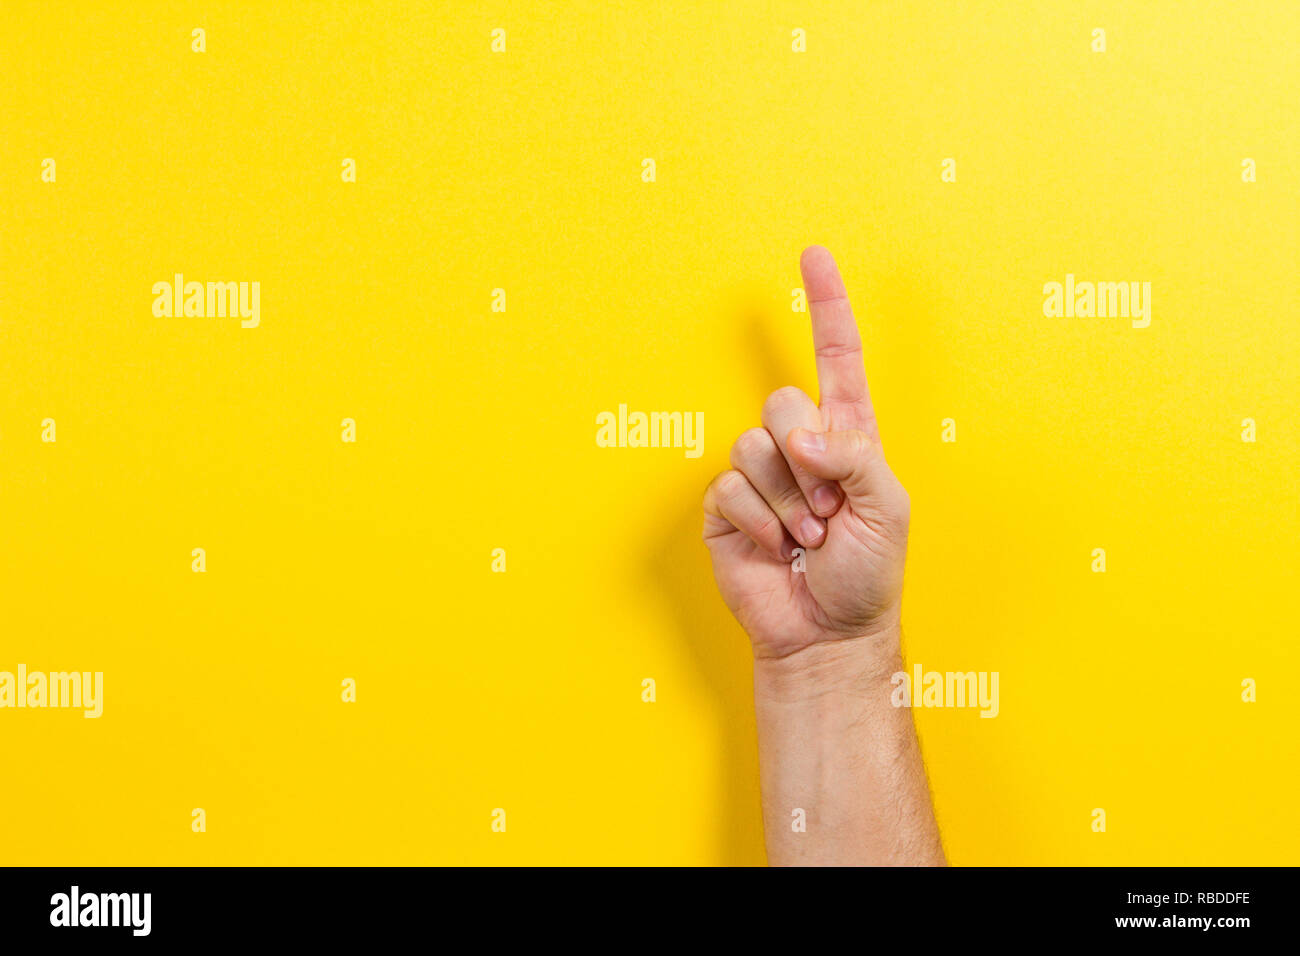 Man hand showing one finger on yellow background Stock Photo